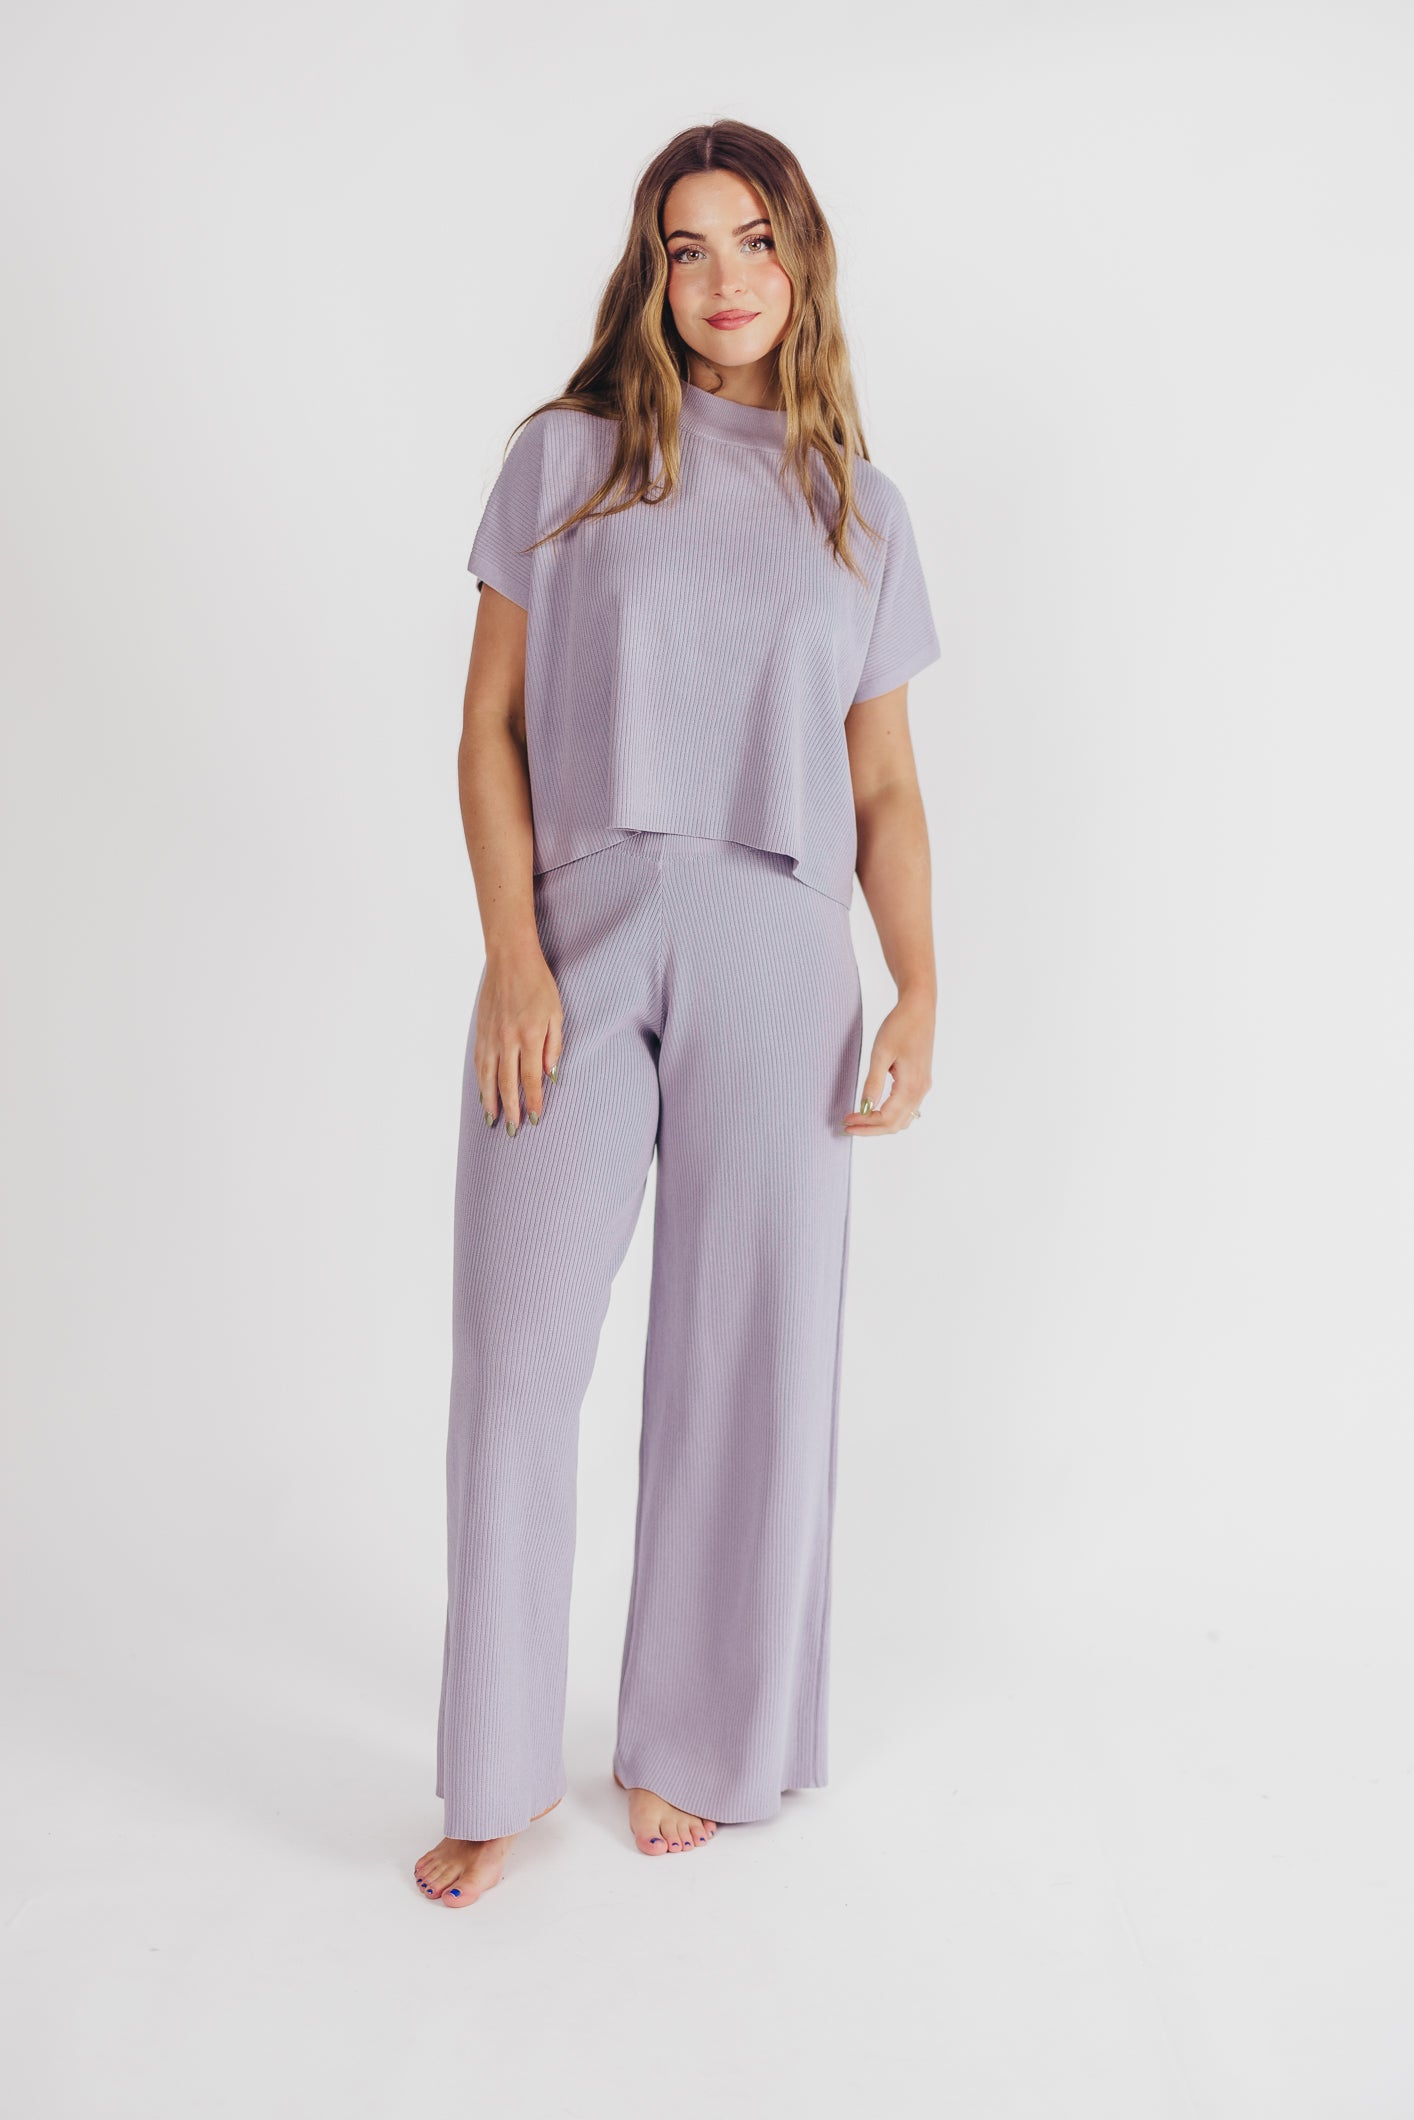 Tripp Knit Top and Pant Set in Blue Grey